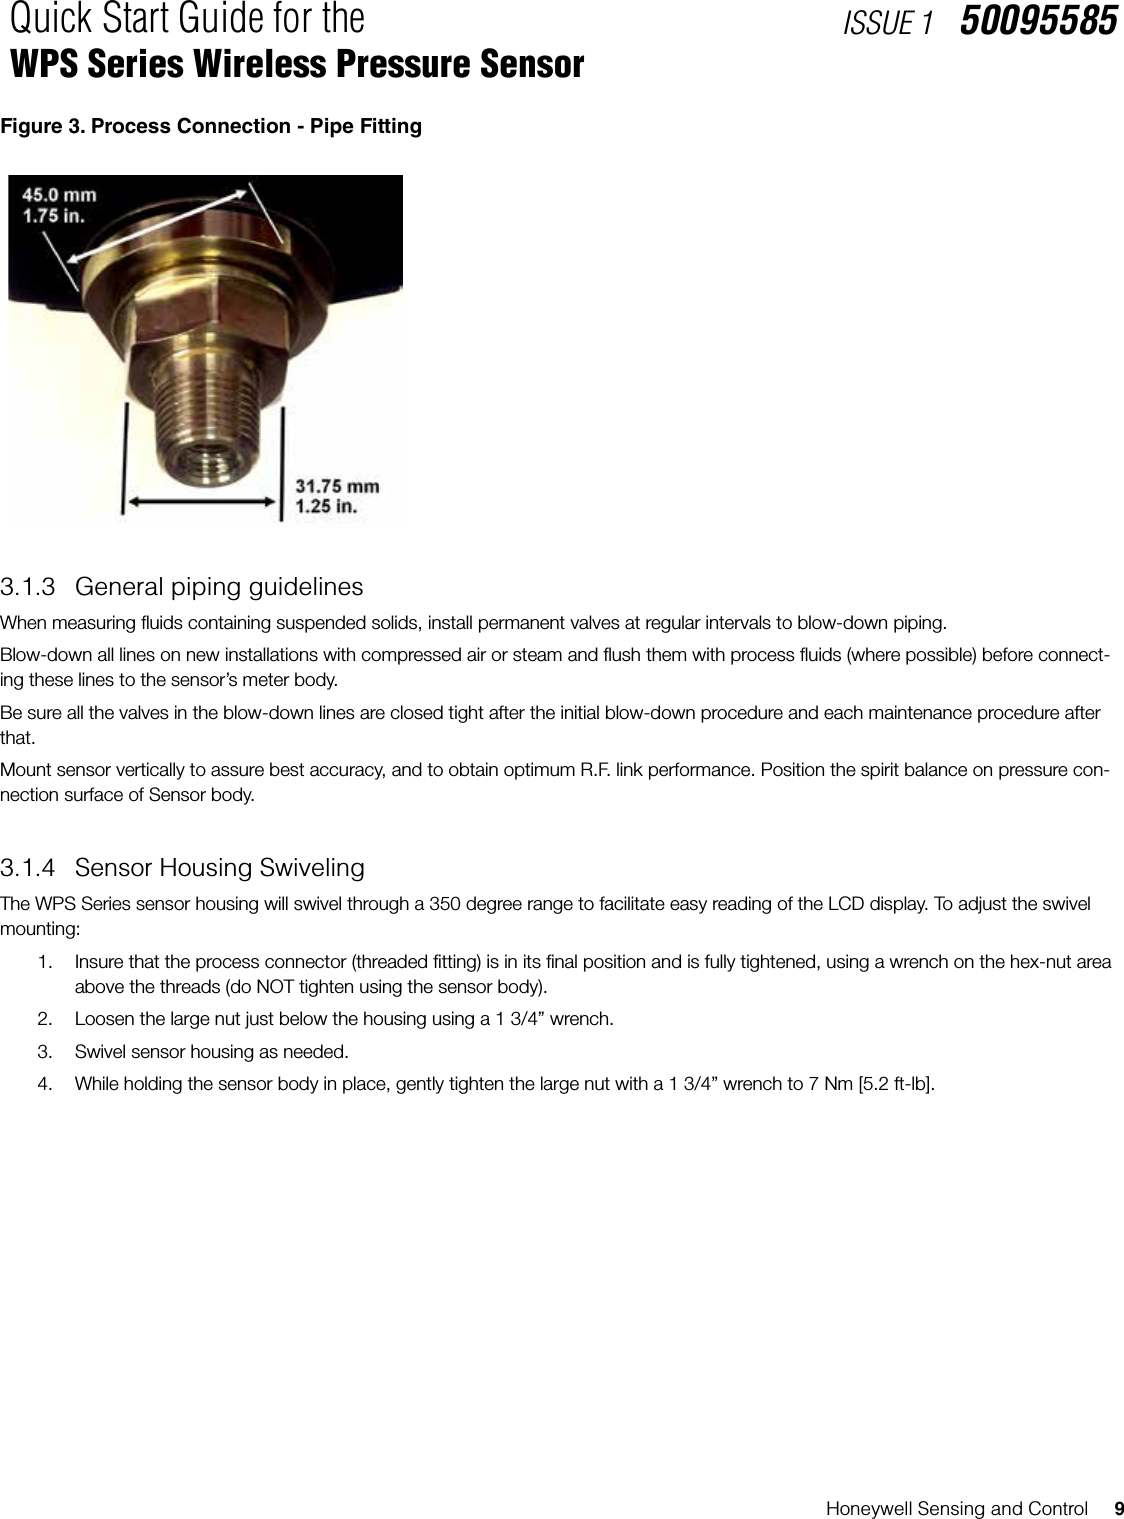 Honeywell Sensing and Control     9Quick Start Guide for the WPS Series Wireless Pressure SensorISSUE 1   50095585Figure 3. Process Connection - Pipe Fitting3.1.3  General piping guidelinesWhen measuring uids containing suspended solids, install permanent valves at regular intervals to blow-down piping. Blow-down all lines on new installations with compressed air or steam and ush them with process uids (where possible) before connect-ing these lines to the sensor’s meter body. Be sure all the valves in the blow-down lines are closed tight after the initial blow-down procedure and each maintenance procedure after that.Mount sensor vertically to assure best accuracy, and to obtain optimum R.F. link performance. Position the spirit balance on pressure con-nection surface of Sensor body.3.1.4  Sensor Housing SwivelingThe WPS Series sensor housing will swivel through a 350 degree range to facilitate easy reading of the LCD display. To adjust the swivel mounting:1.  Insure that the process connector (threaded tting) is in its nal position and is fully tightened, using a wrench on the hex-nut area above the threads (do NOT tighten using the sensor body).2.  Loosen the large nut just below the housing using a 1 3/4” wrench.3.  Swivel sensor housing as needed.4.  While holding the sensor body in place, gently tighten the large nut with a 1 3/4” wrench to 7 Nm [5.2 ft-lb].